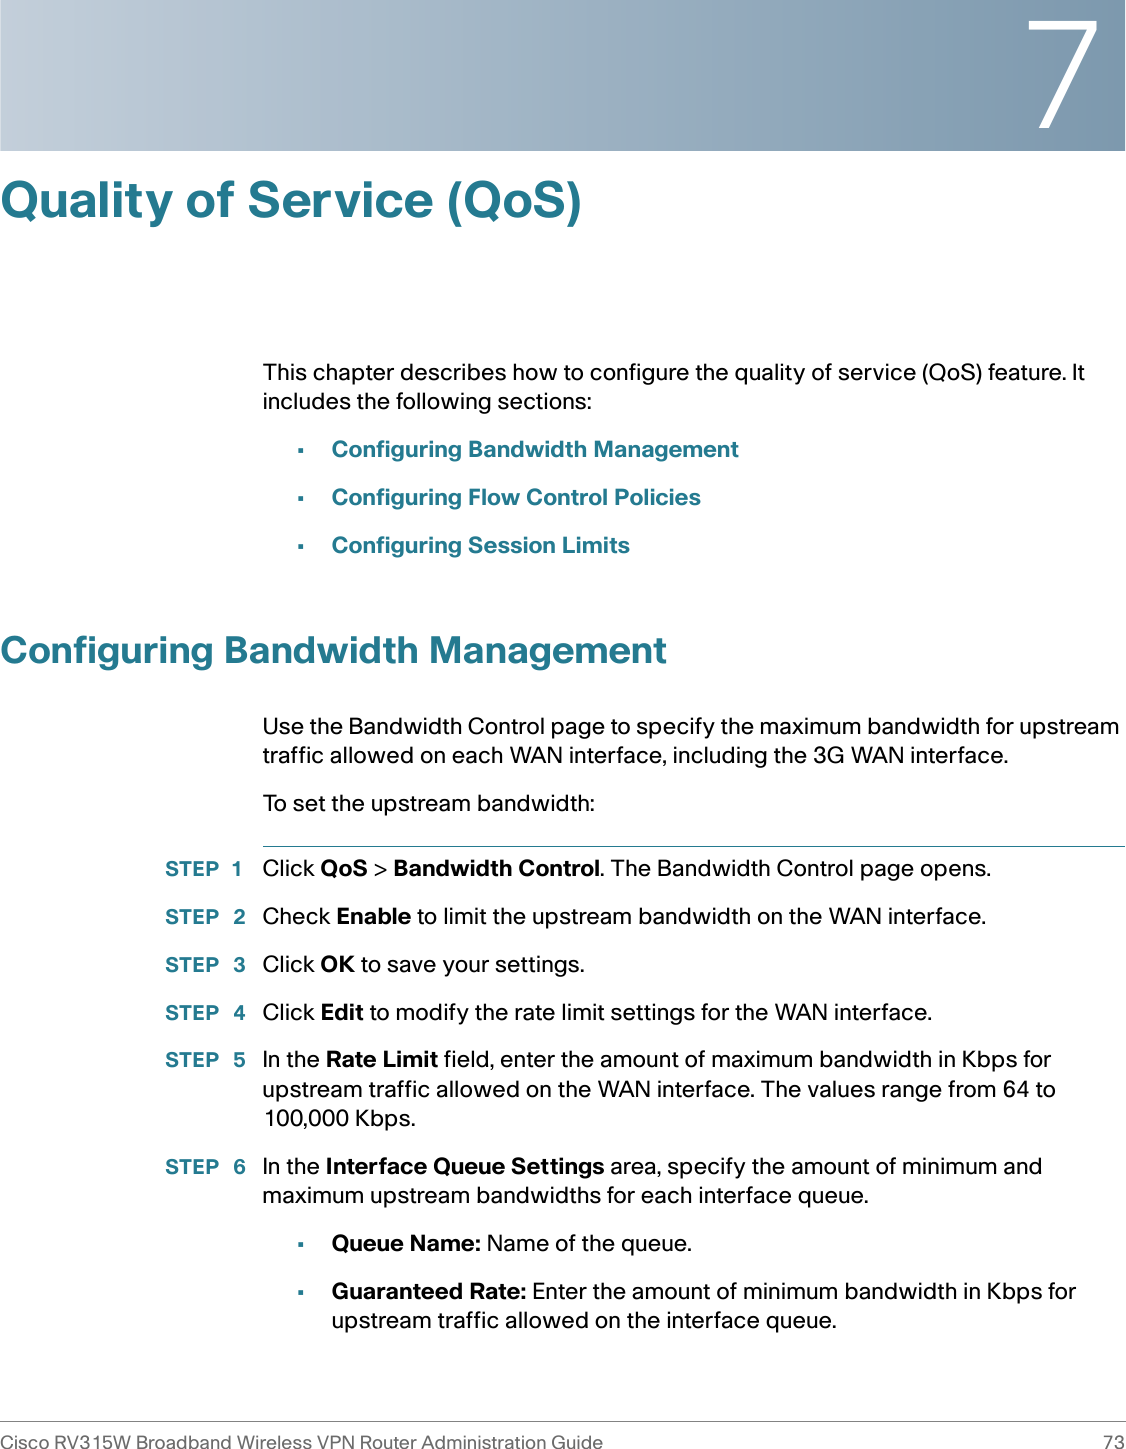 7Cisco RV315W Broadband Wireless VPN Router Administration Guide 73Quality of Service (QoS)This chapter describes how to configure the quality of service (QoS) feature. It includes the following sections:•Configuring Bandwidth Management•Configuring Flow Control Policies•Configuring Session LimitsConfiguring Bandwidth ManagementUse the Bandwidth Control page to specify the maximum bandwidth for upstream traffic allowed on each WAN interface, including the 3G WAN interface.To set the upstream bandwidth:STEP 1 Click QoS &gt; Bandwidth Control. The Bandwidth Control page opens.STEP  2 Check Enable to limit the upstream bandwidth on the WAN interface. STEP  3 Click OK to save your settings. STEP  4 Click Edit to modify the rate limit settings for the WAN interface. STEP  5 In the Rate Limit field, enter the amount of maximum bandwidth in Kbps for upstream traffic allowed on the WAN interface. The values range from 64 to 100,000 Kbps. STEP  6 In the Interface Queue Settings area, specify the amount of minimum and maximum upstream bandwidths for each interface queue. •Queue Name: Name of the queue. •Guaranteed Rate: Enter the amount of minimum bandwidth in Kbps for upstream traffic allowed on the interface queue.